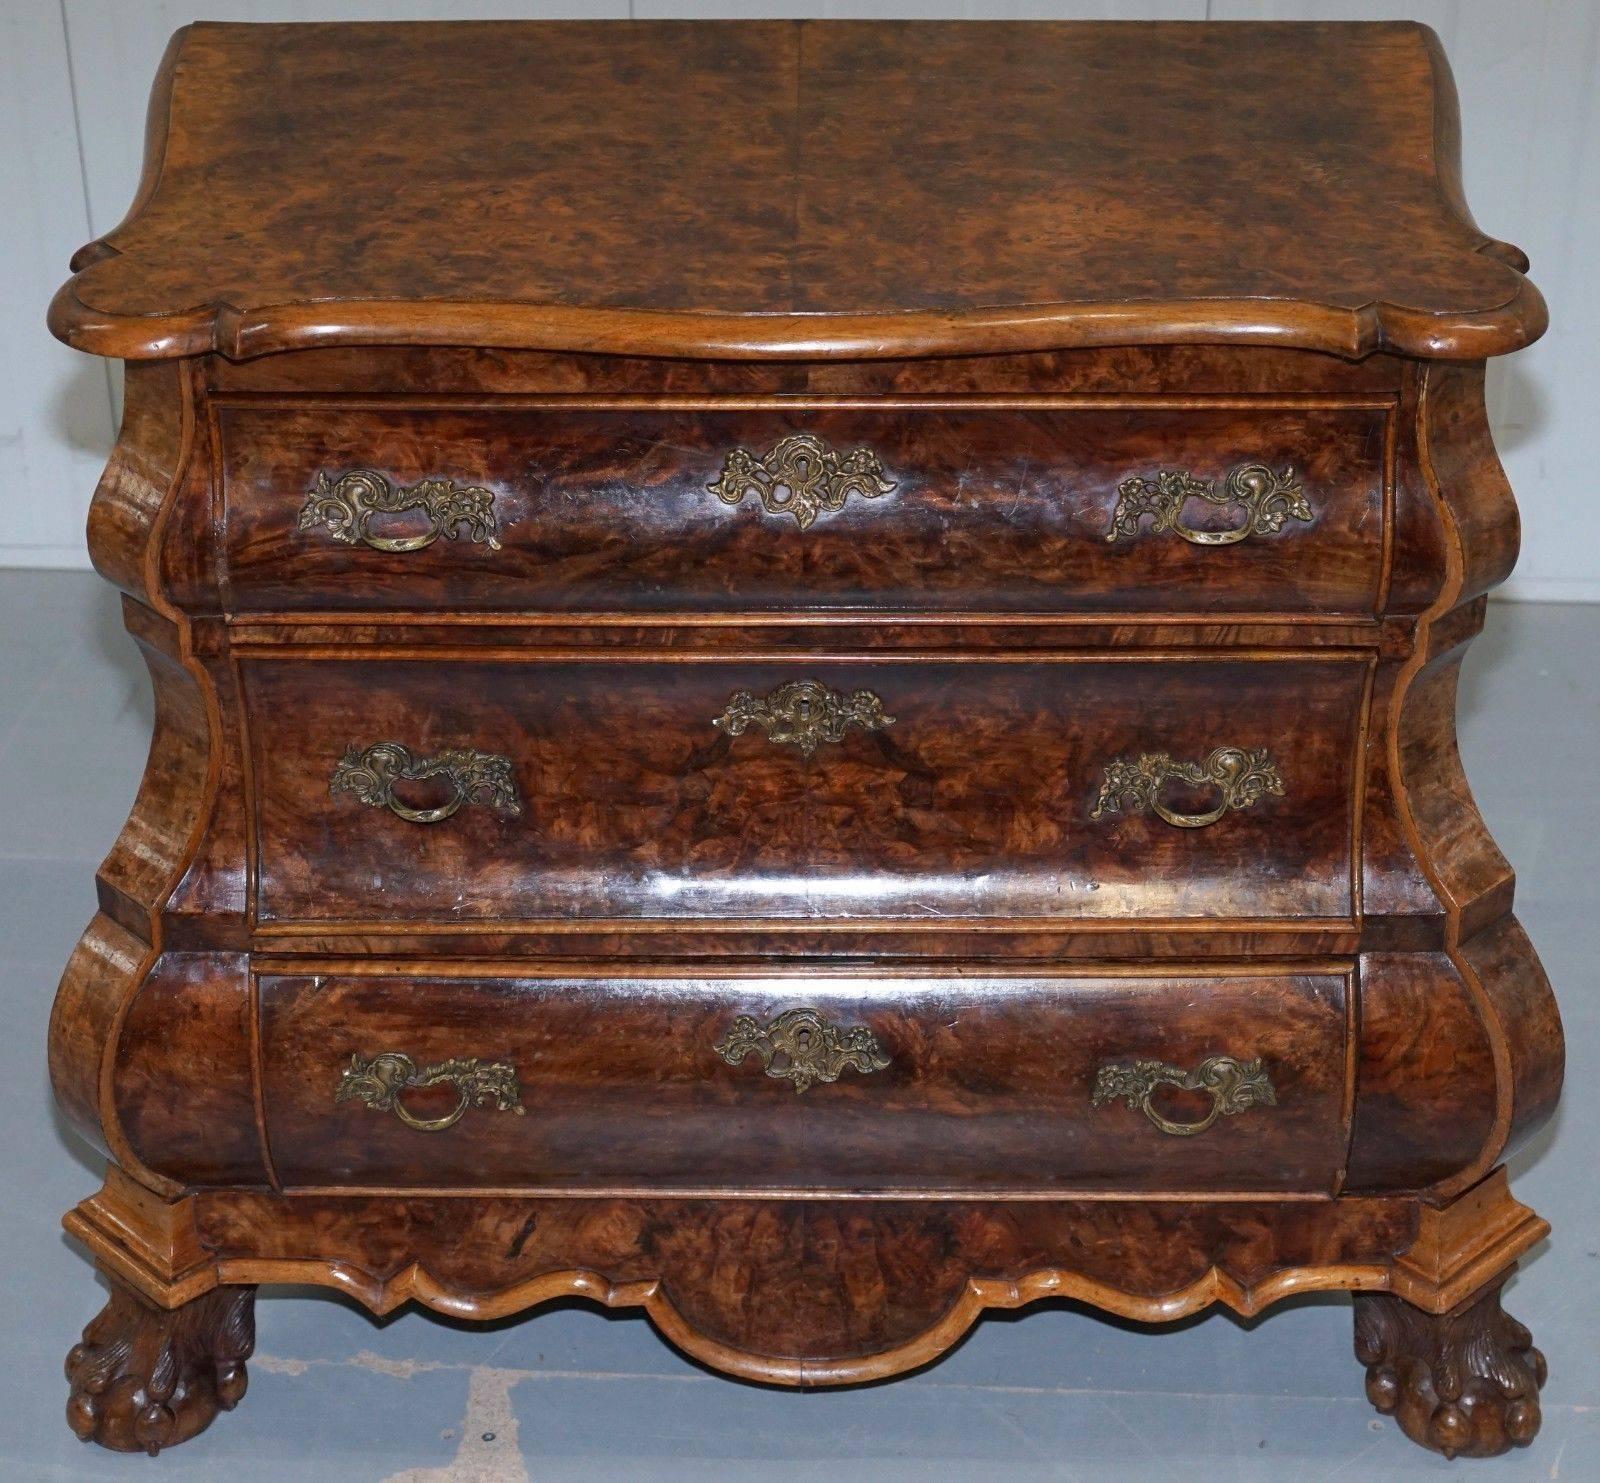 We are delighted to offer for sale this stunning circa 1840 burr walnut Dutch Bombe chest of drawers

A very rare and stunning looking piece, the burr walnut patina is to die for as is the hand-carved hairy paw claw and ball feet

The chest has